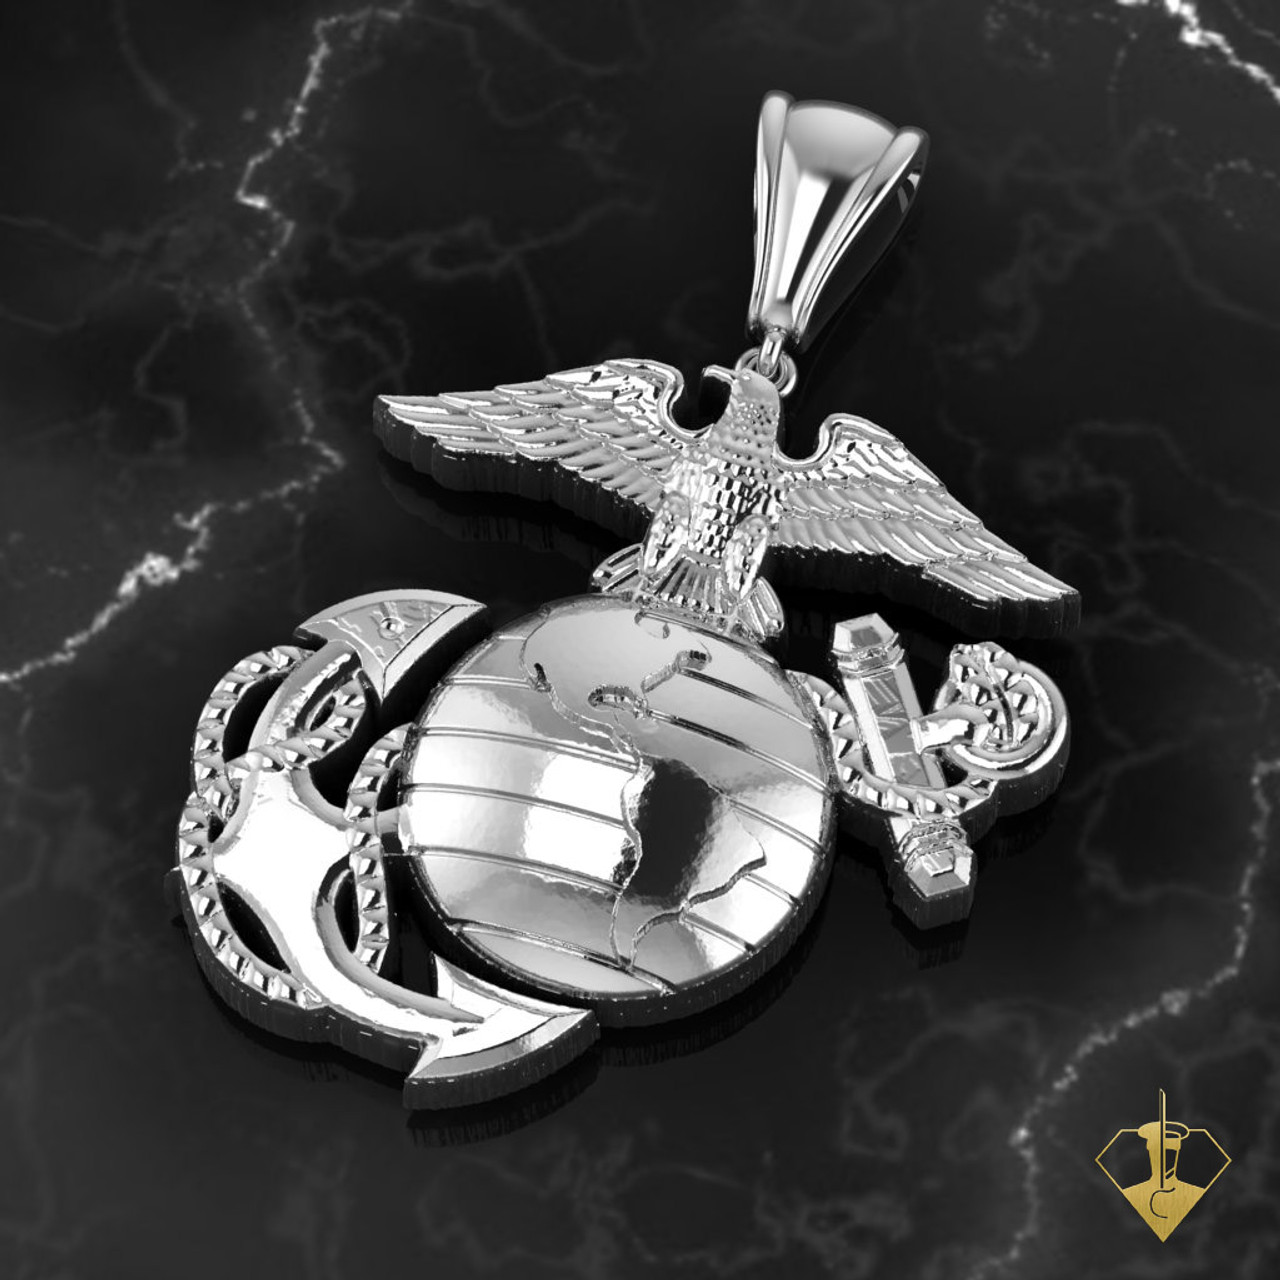  Eagle, Globe and Anchor 1" Necklace
with 18" Chain, Solid Sterling Silver

"MADE BY MARINES FOR MARINES"